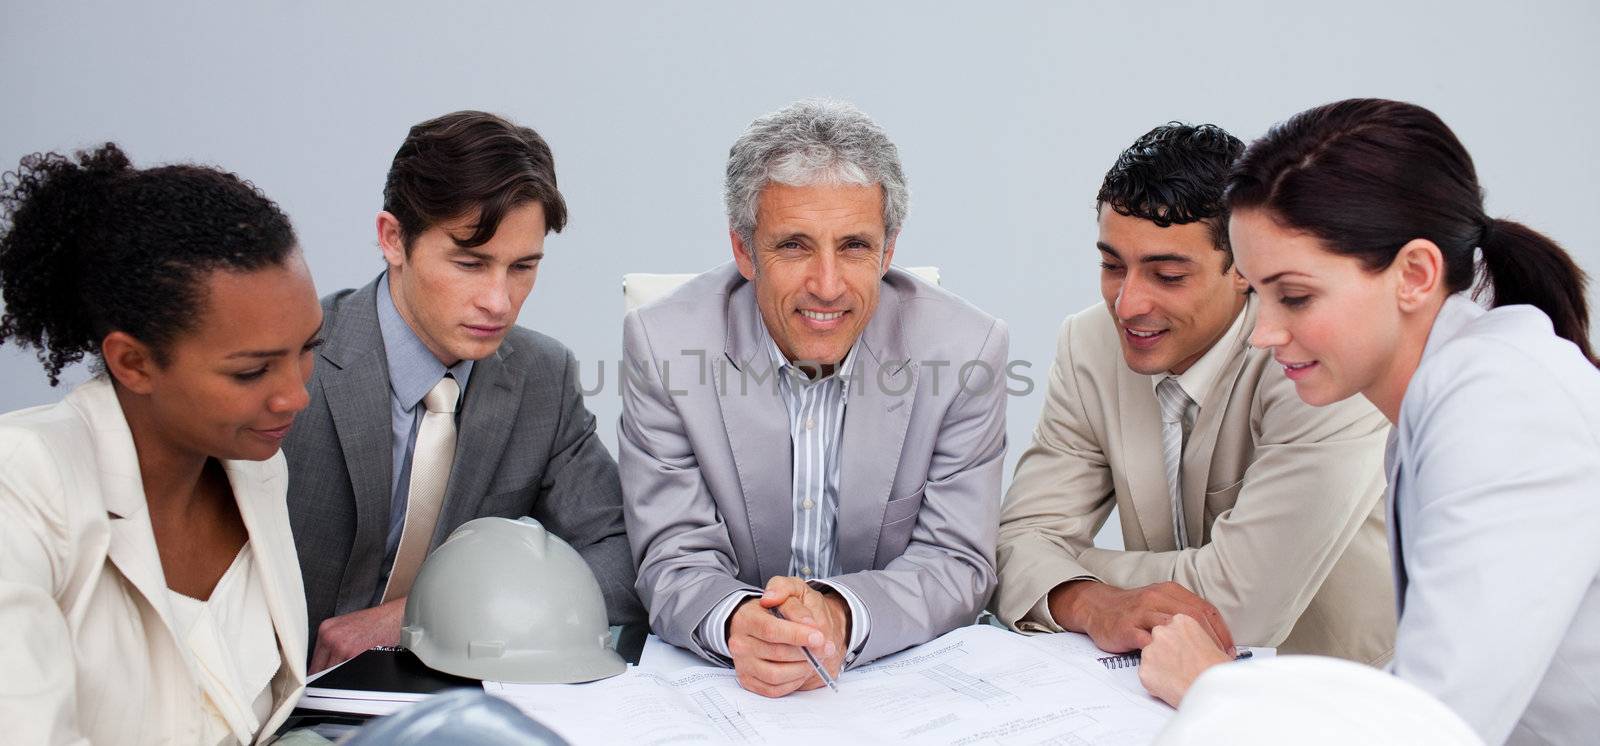 Architect manager in a meeting with his team studying plans by Wavebreakmedia